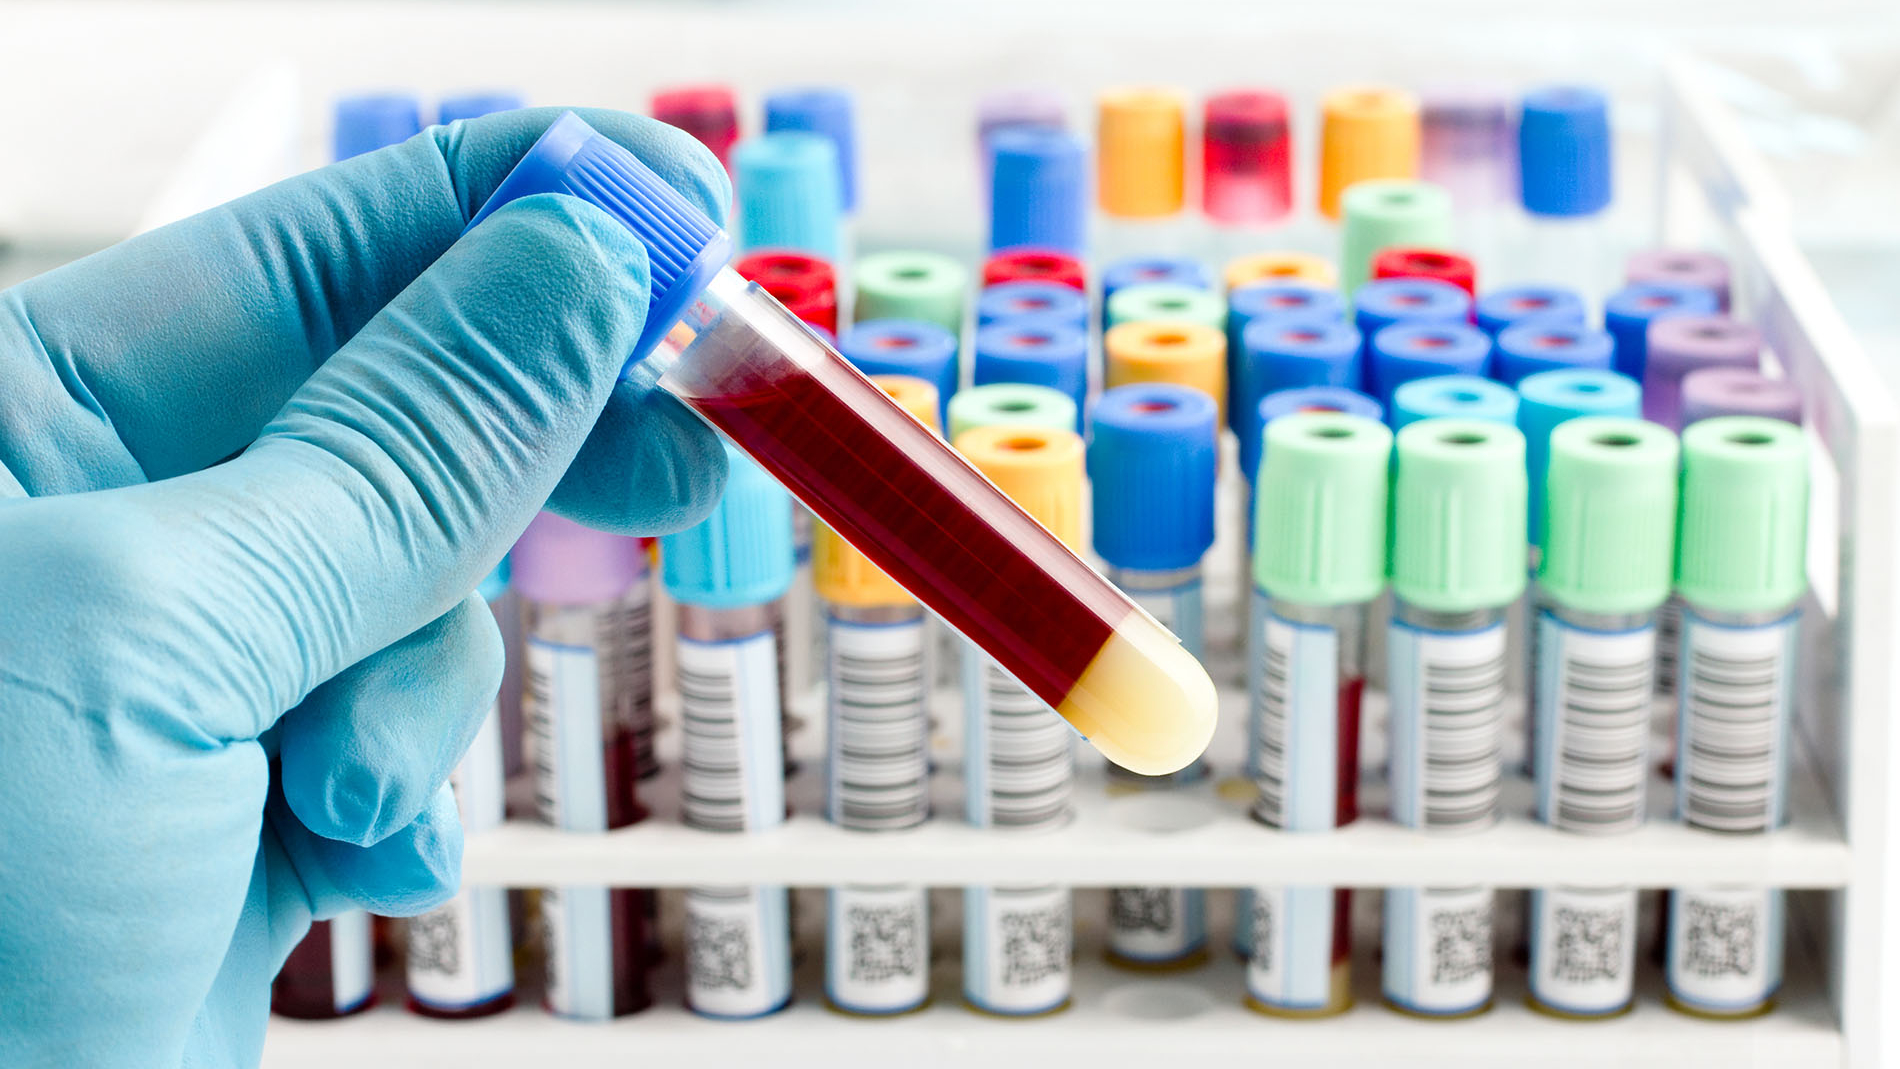 Explained: What is antibody test for COVID-19 and why is it important?